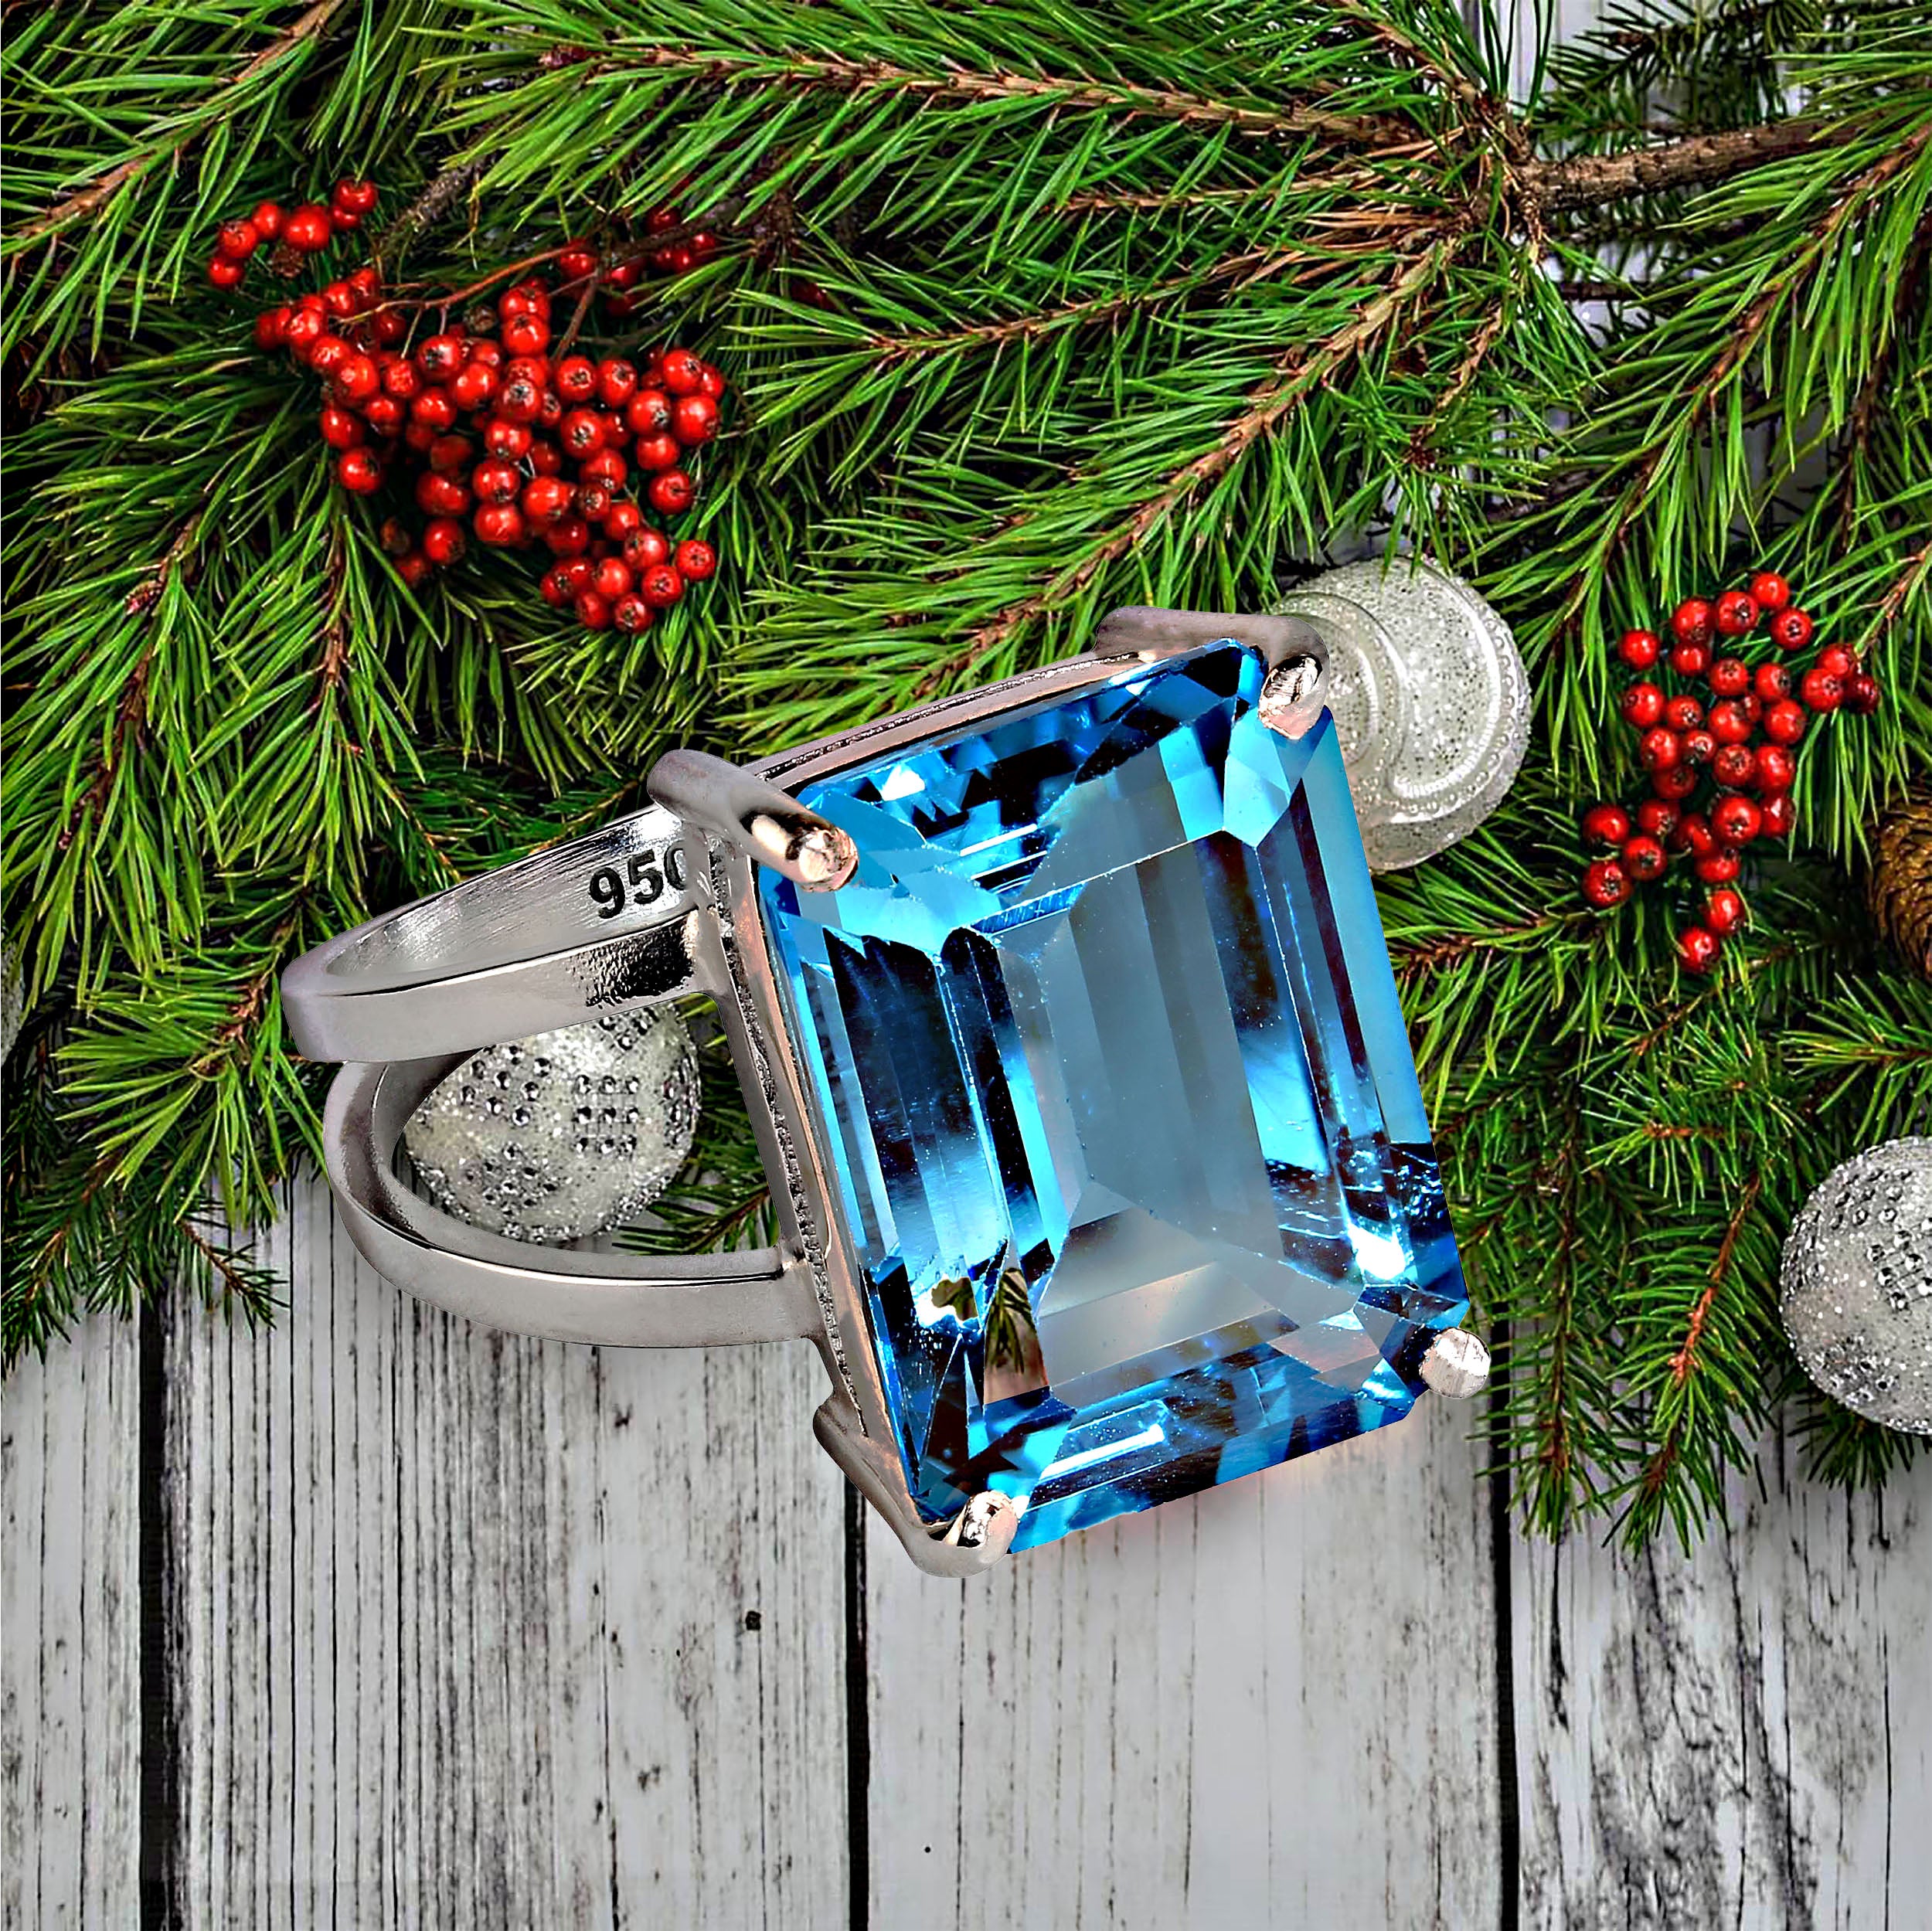 Elegant emerald cut Swiss Blue Topaz sits in a handmade Sterling Silver setting perfect to display this irresistible gemstone. It is 15 X 11 MM and 11.74 carats.  This unique ring comes from our favorite vendor in Belo Horizonte, Minas Gerais,